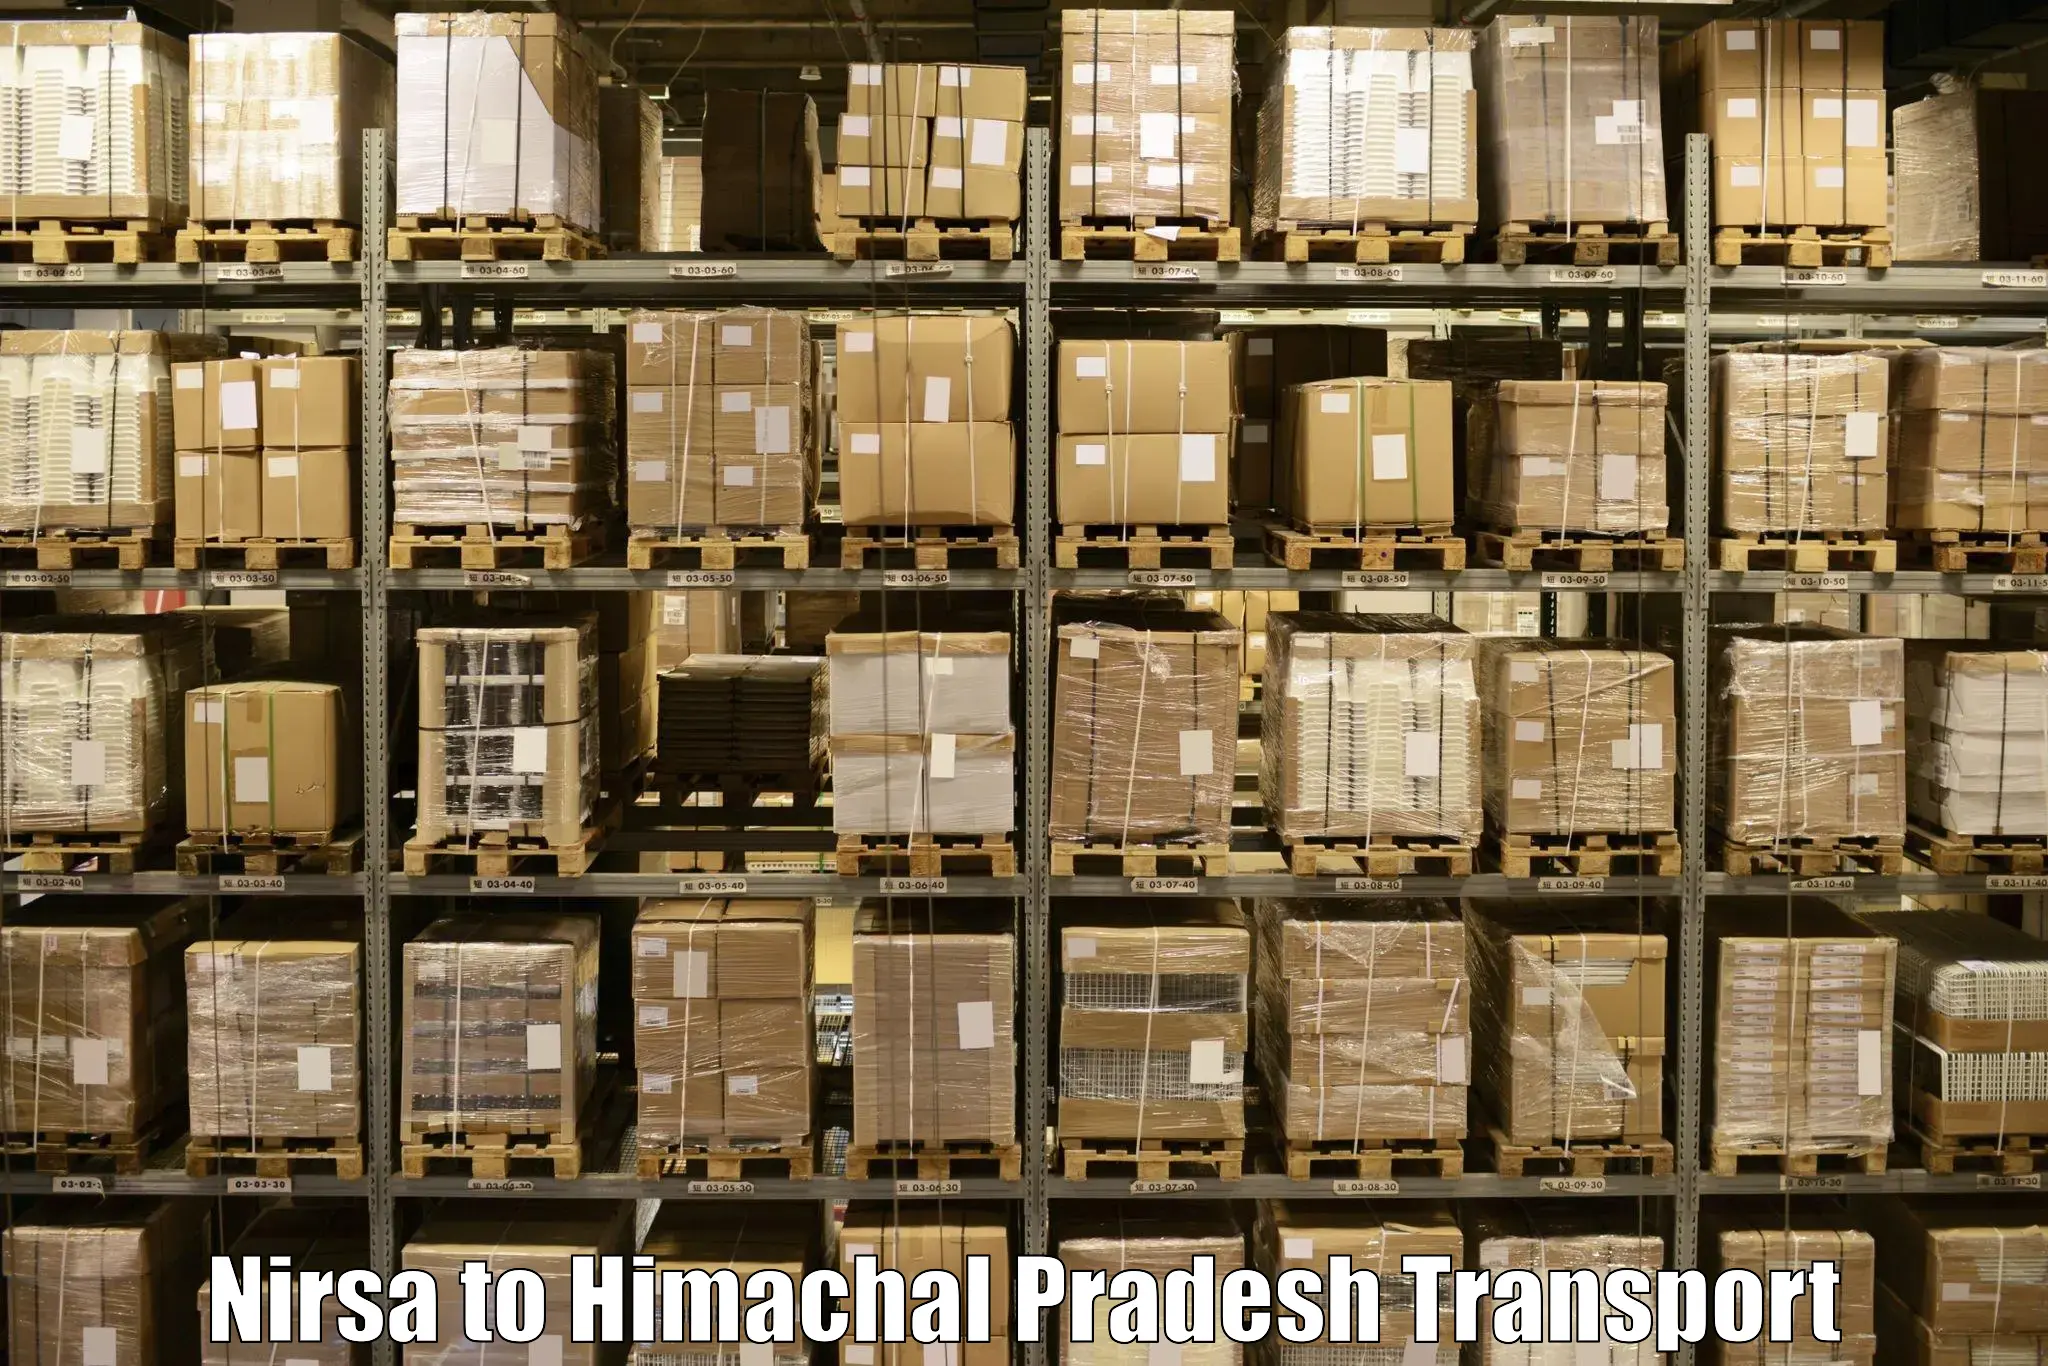 Container transport service Nirsa to Jahu